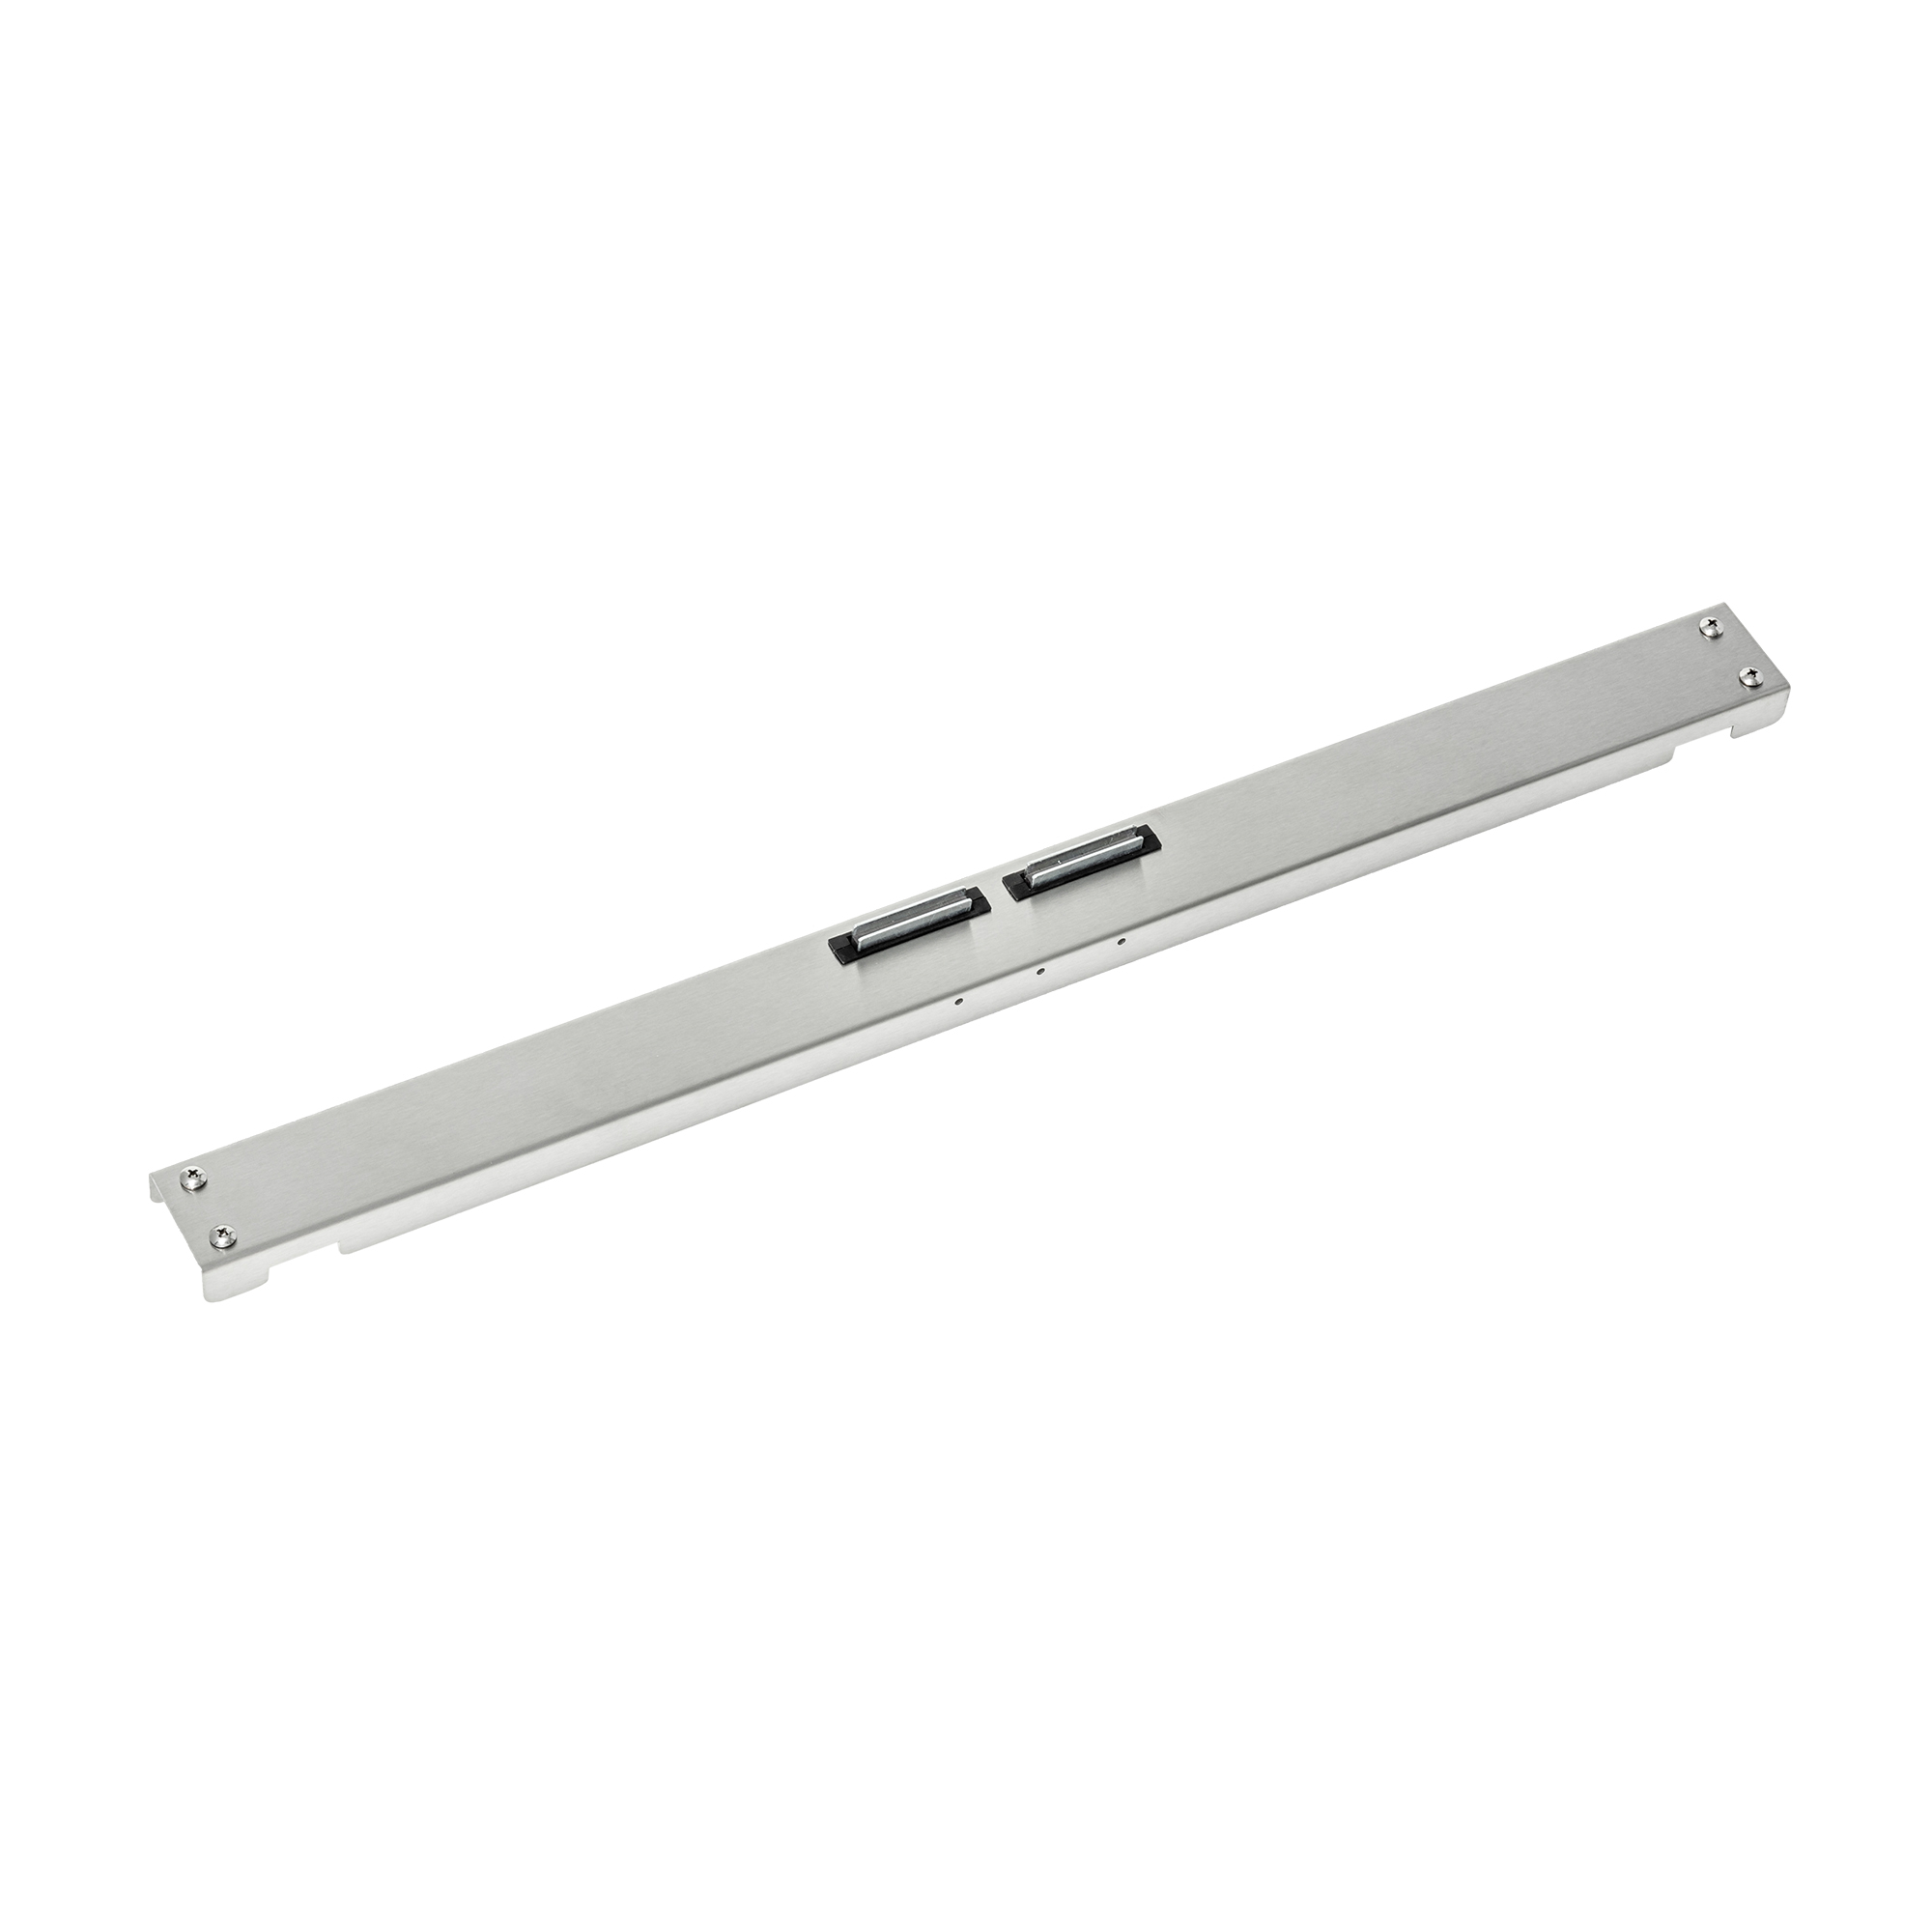 Cabinet reinforcement rail Artiso G3-S front stainless steel